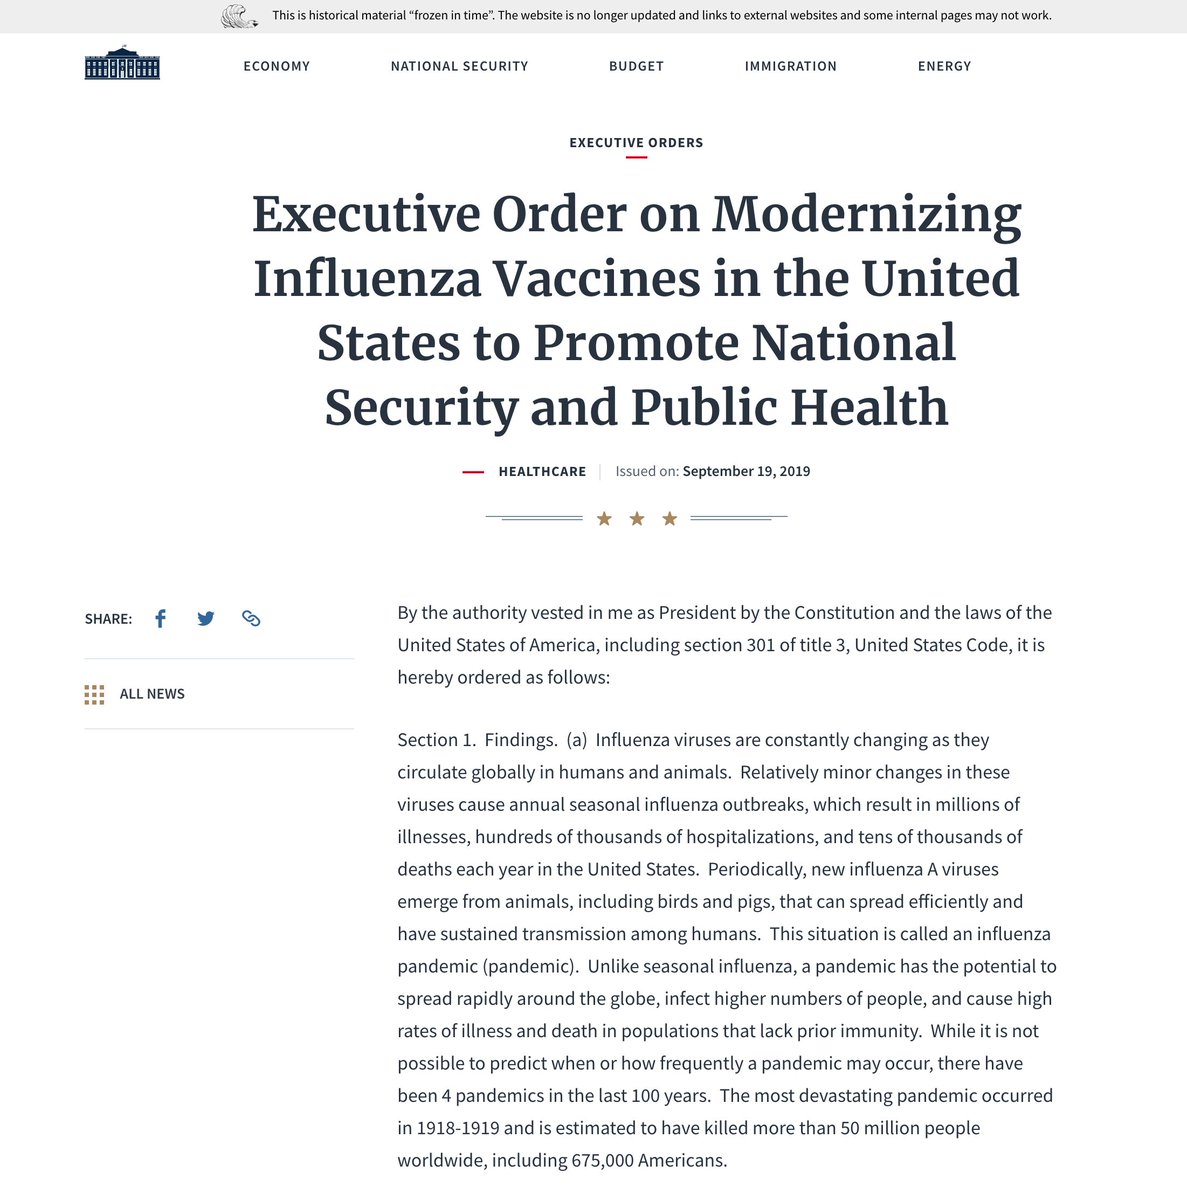 The US Government ordered H7N9 Bird Flu vaccines September 12, 2019. One week later, POTUS signs an Exec. Order Modernizing Influenza vaccines. Four weeks later, is Event 201. They were ordered by Azar's @HHSGov and the @ASPRgov Bob Kadlec. Why did we need H7N9 vaccines?